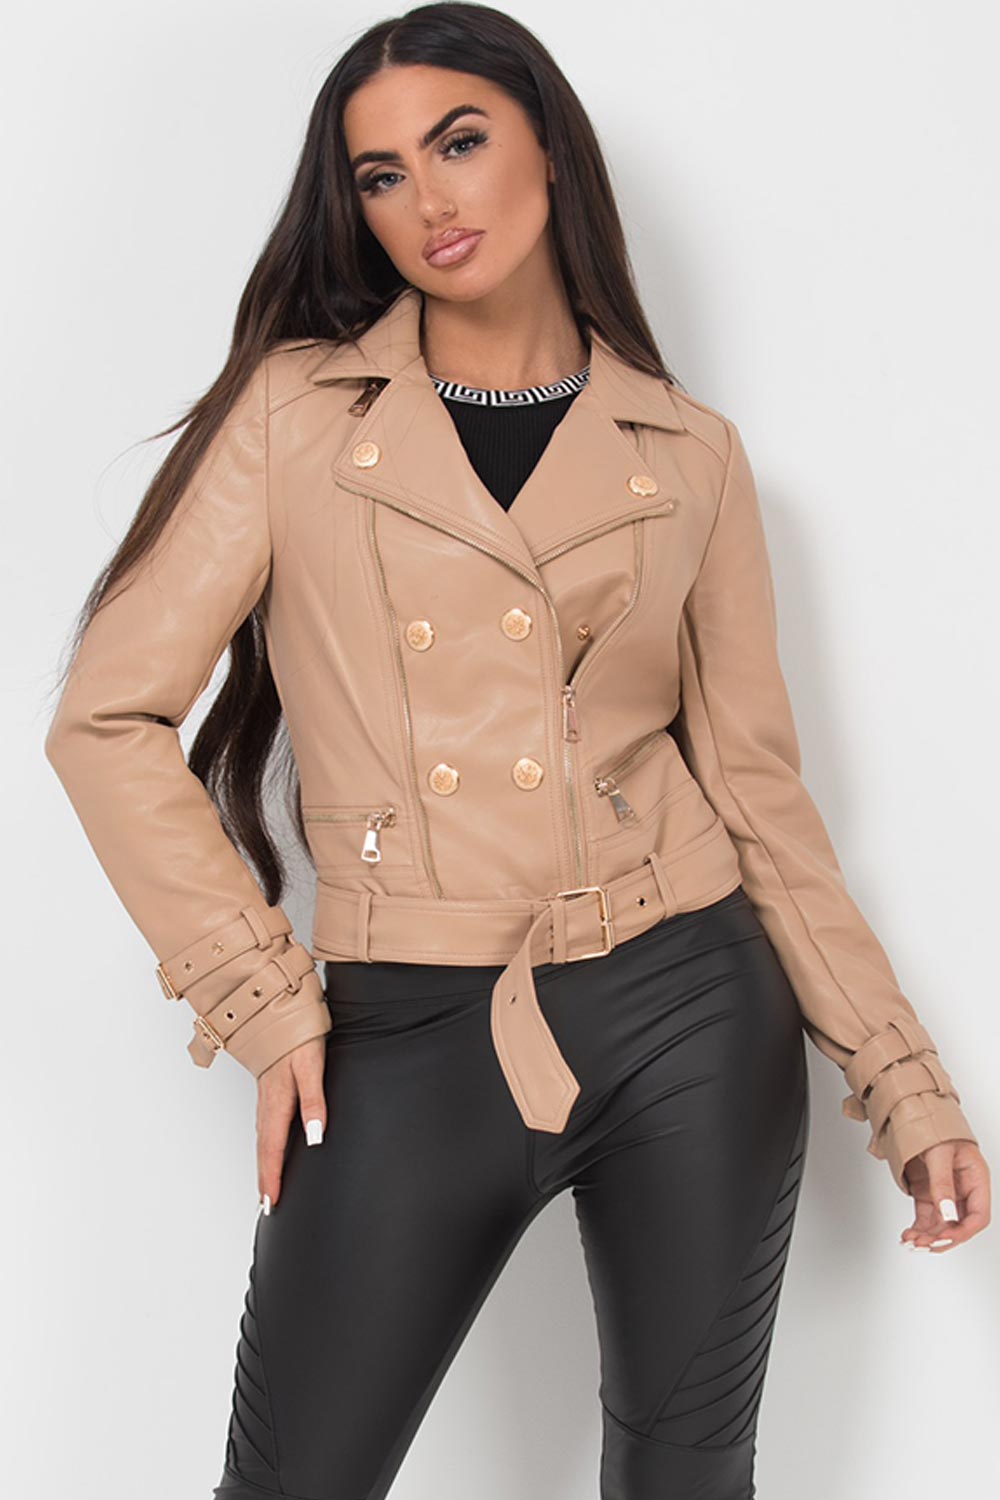 vegan leather jacket with gold buttons